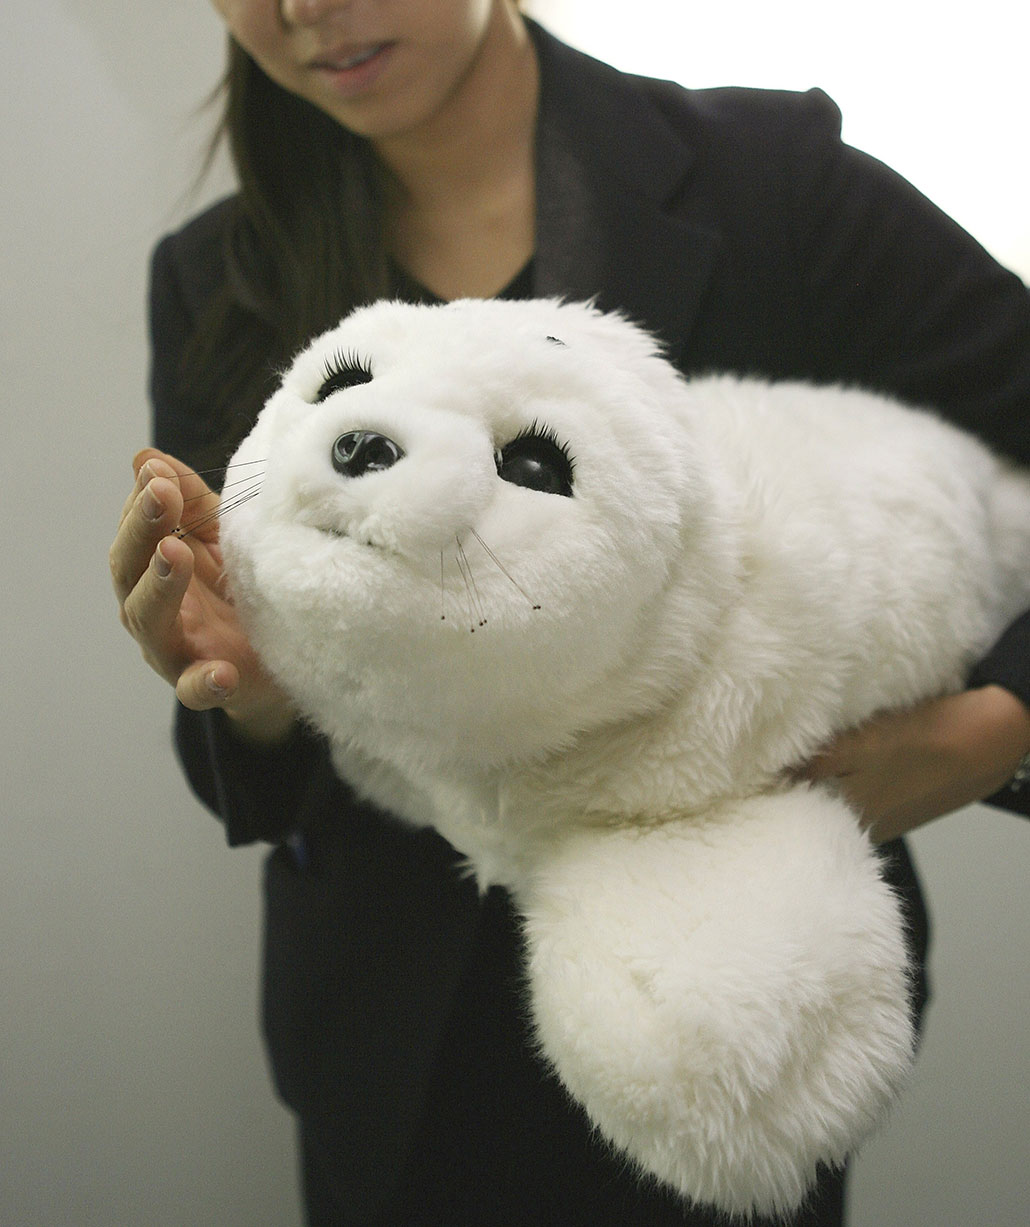 Paro, an ultra-adorable soft robot seal, is being held by a young Japanese woman in a suit. She is about to stroke its cheek, and its face is turned towards the viewer.